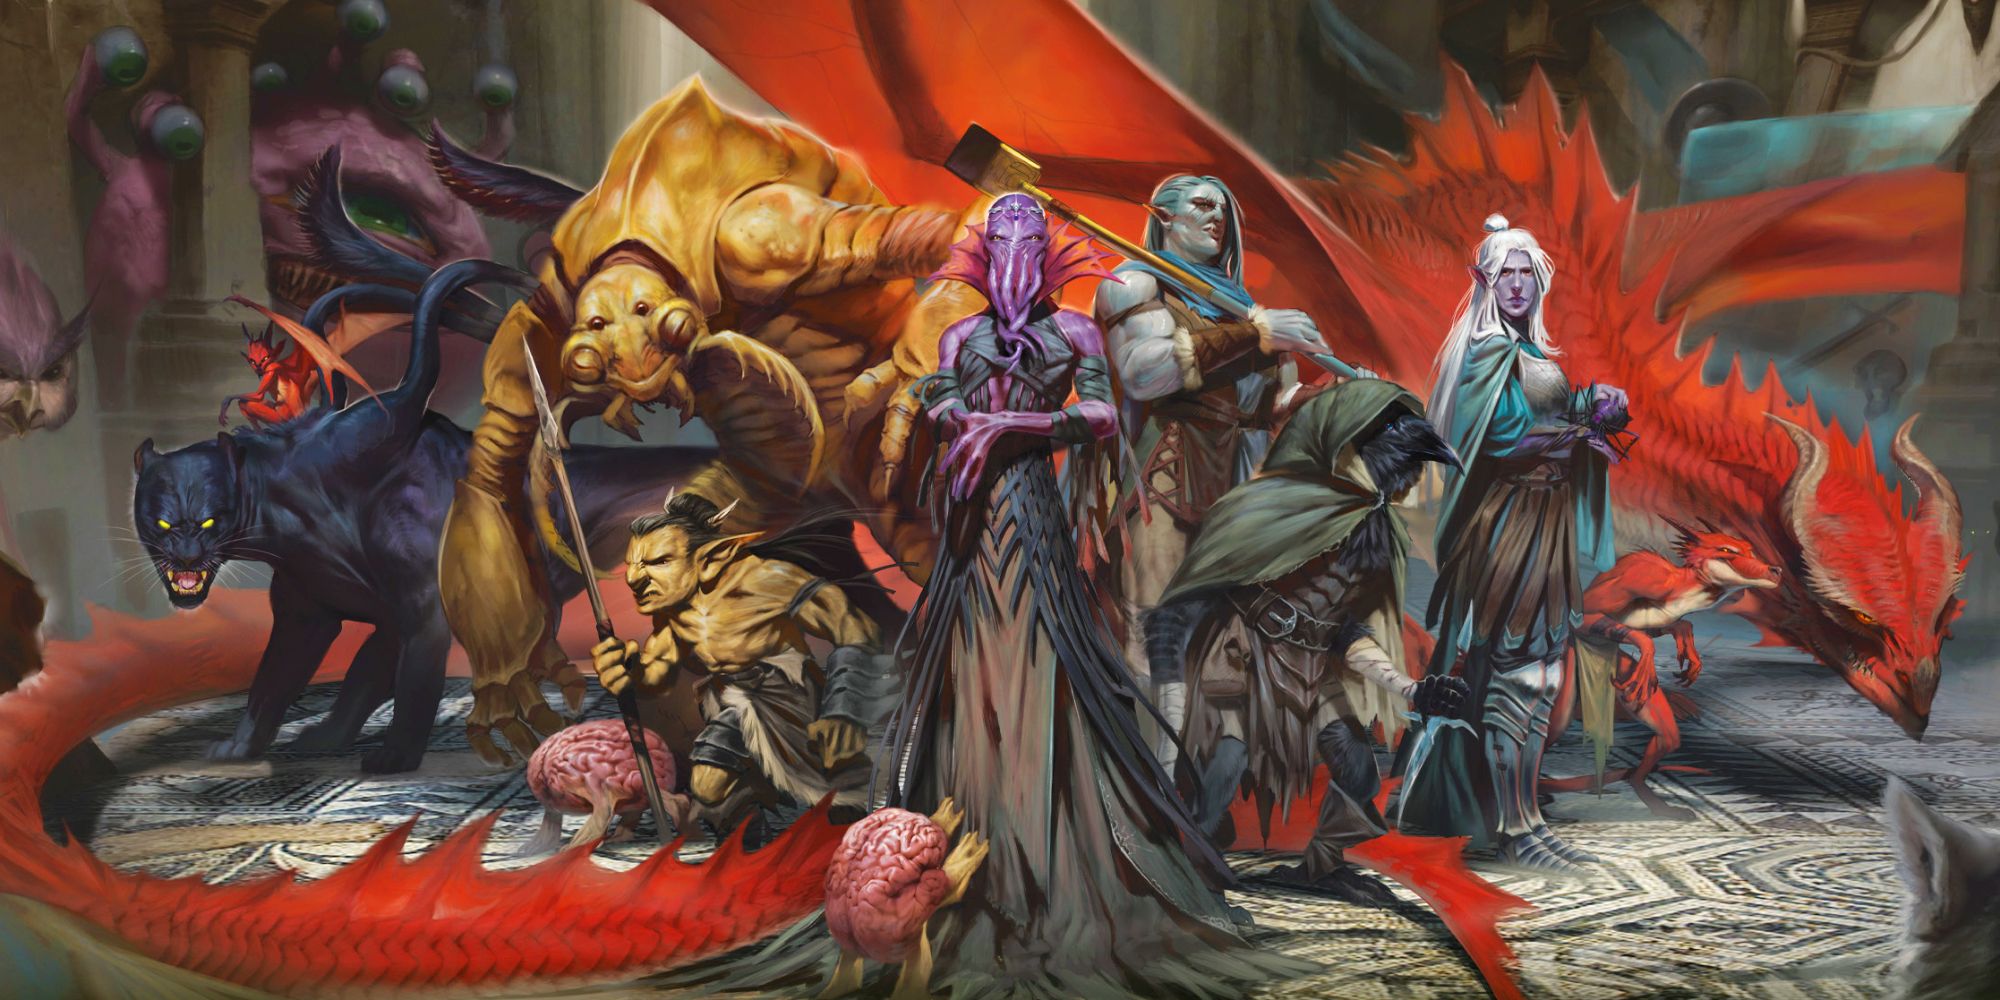 A variety of Dungeons & Dragons characters, all different races or types of creatures standing together in a group. A red dragon encircles the whole group with its body and tail.